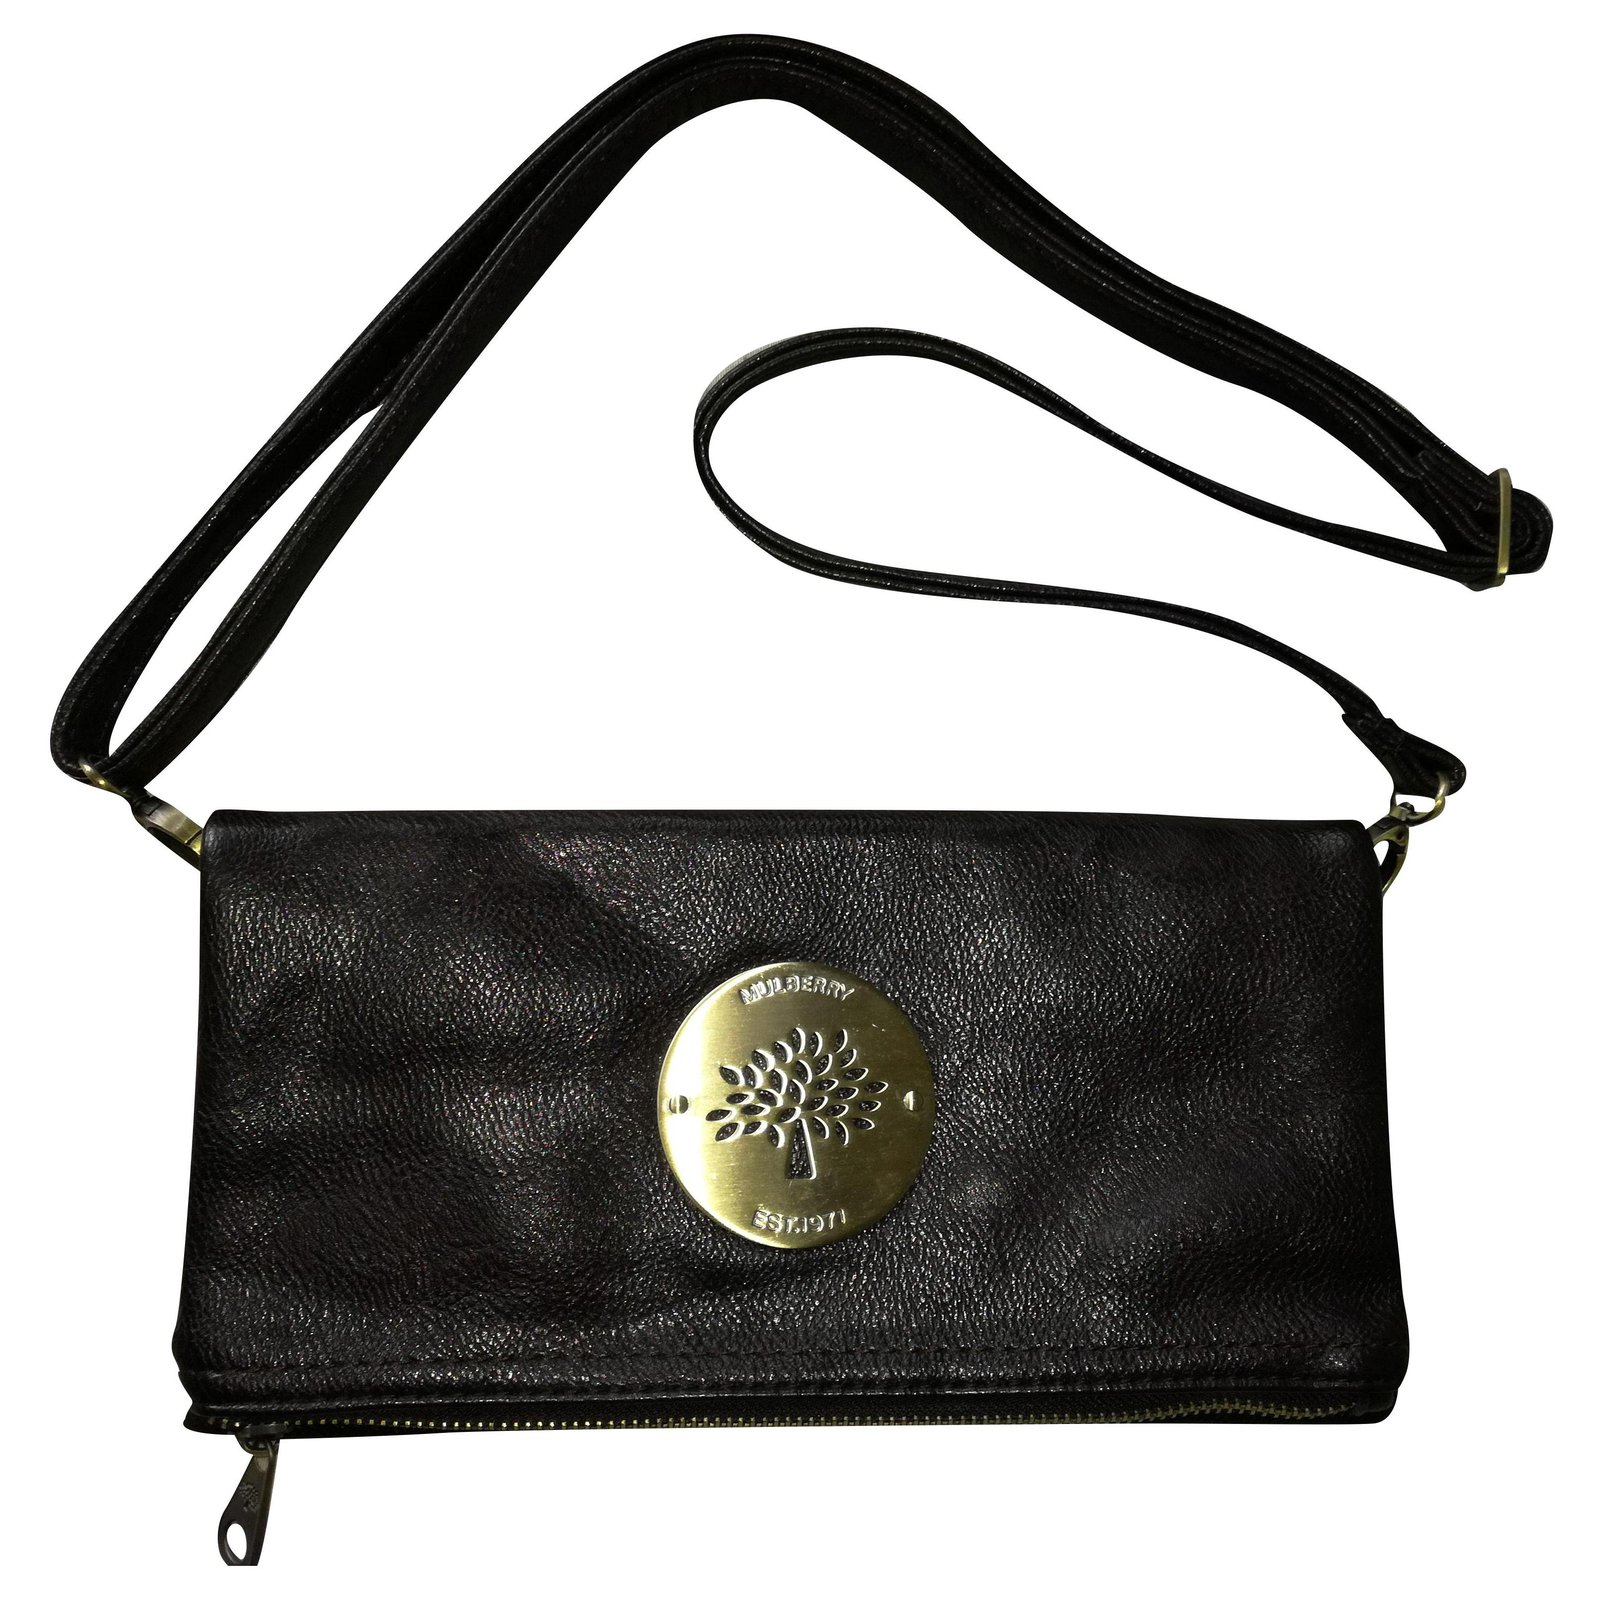 Mulberry leather fold over bag or clutch